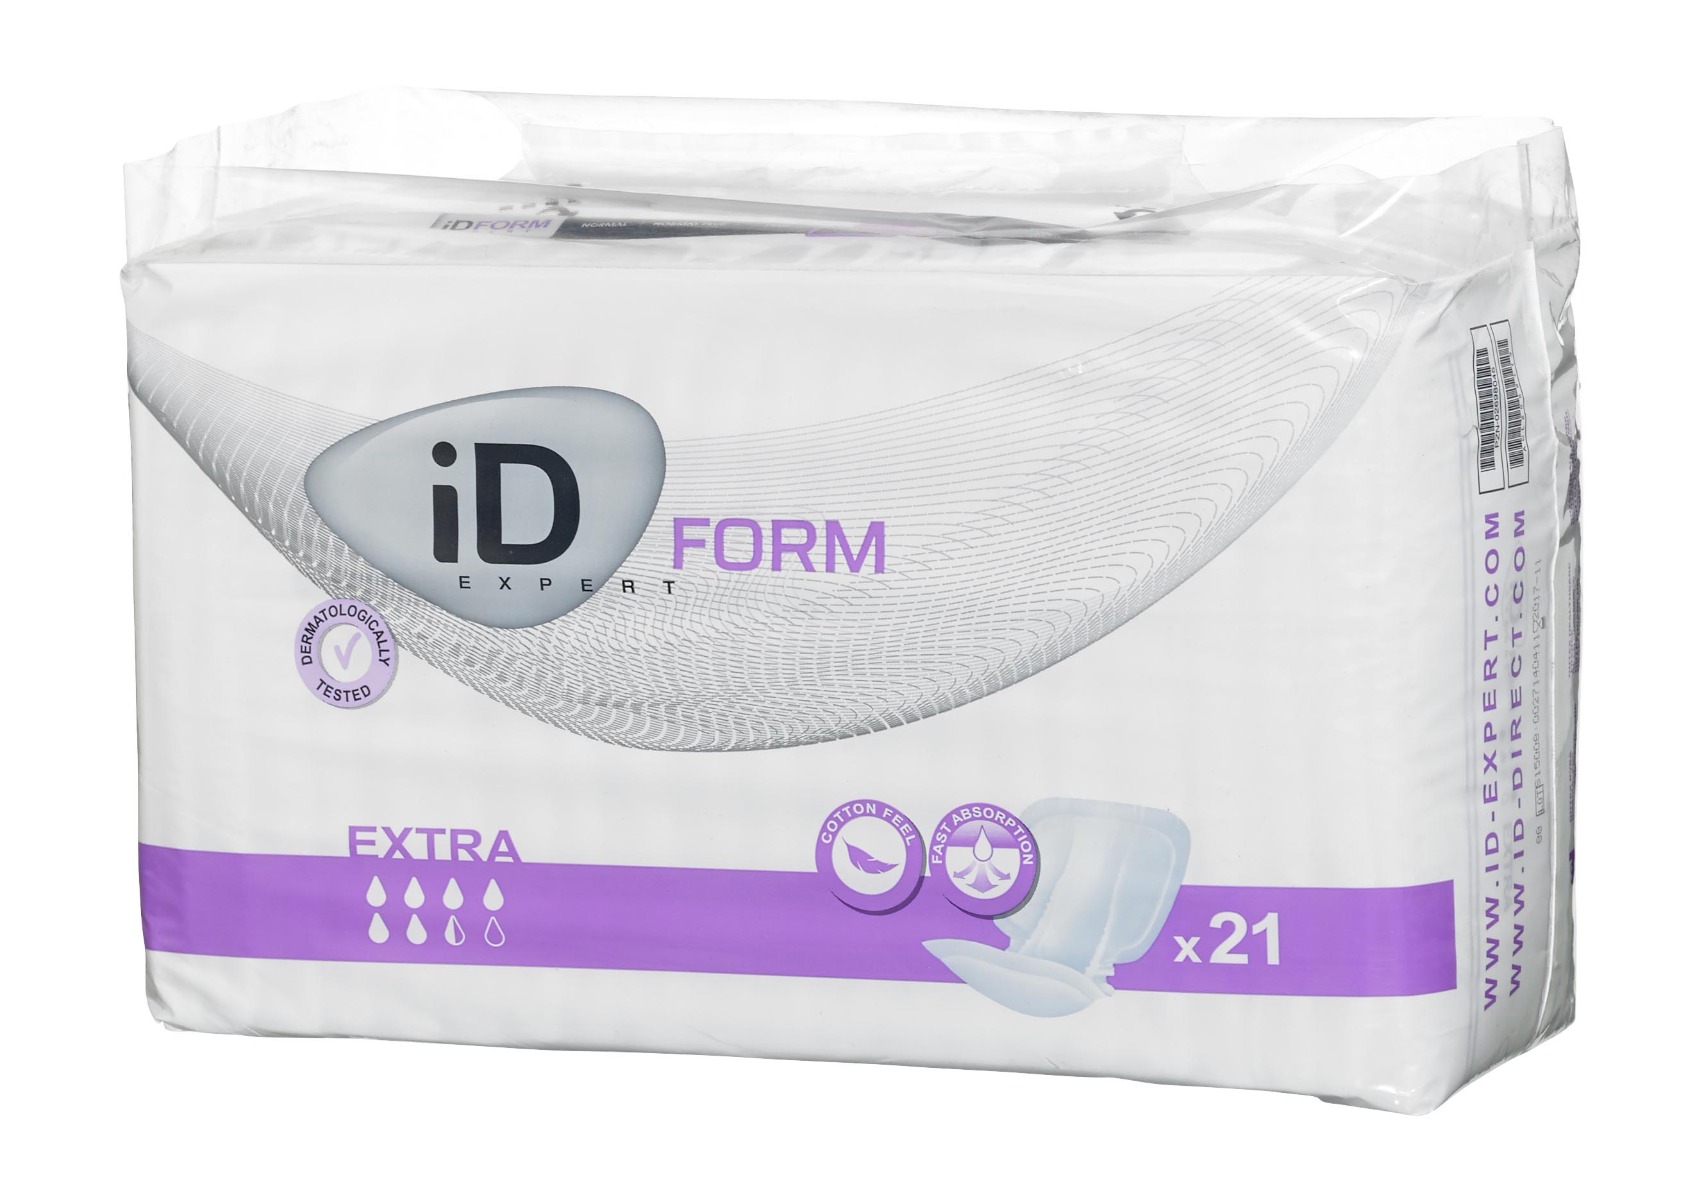 iD Expert Form Incontinence Insert Pads